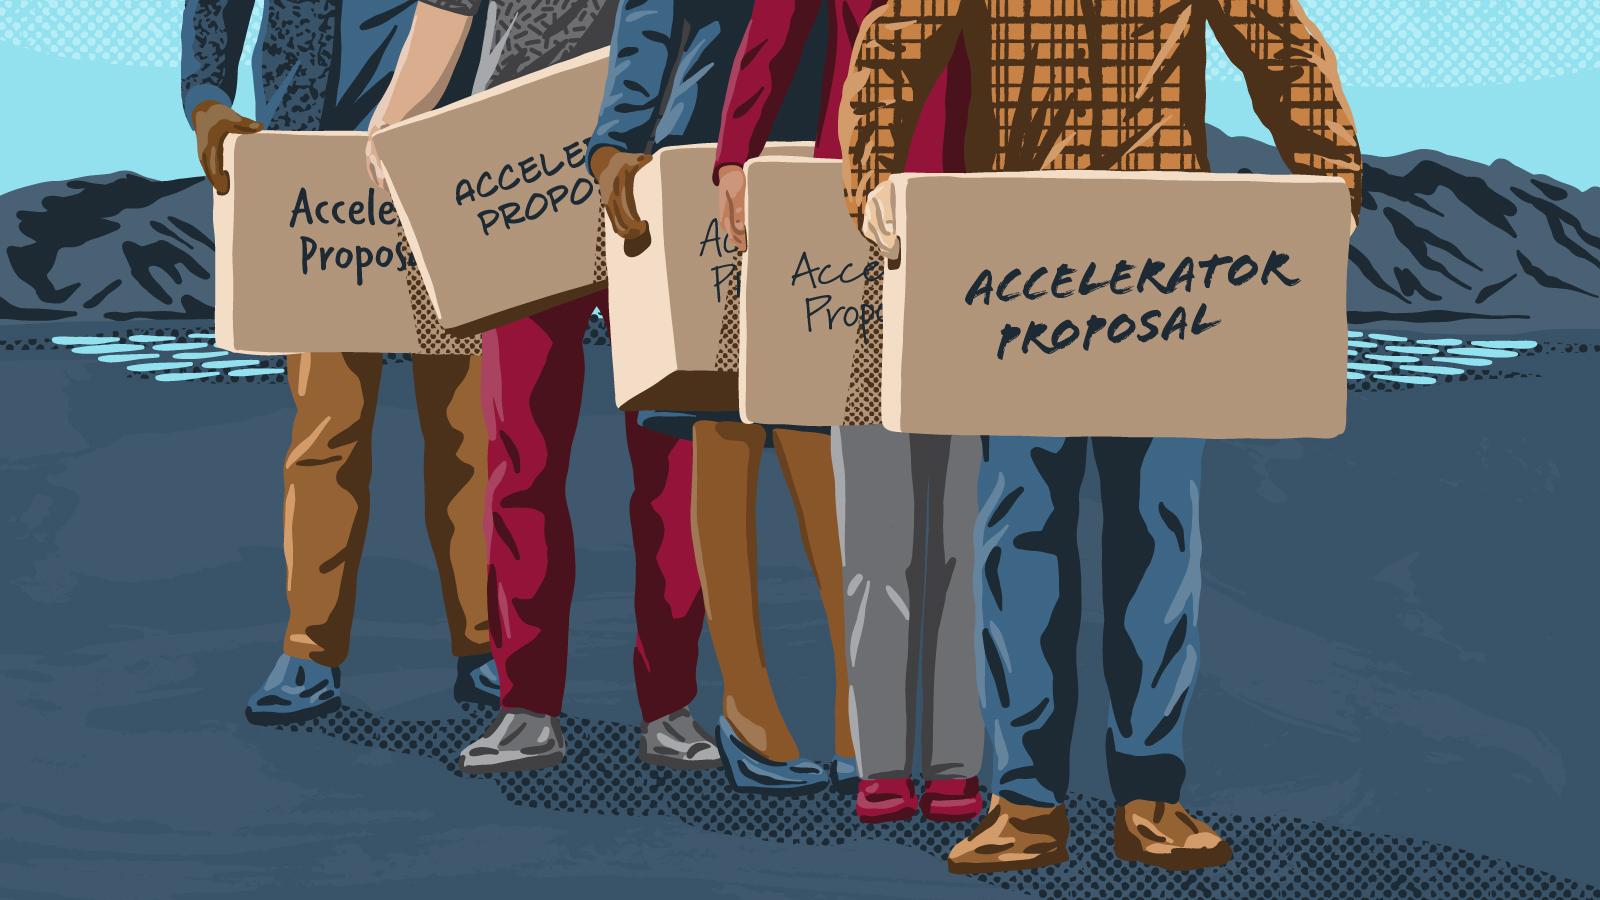 Illustration of people holding boxes labeled "accelerator proposal"